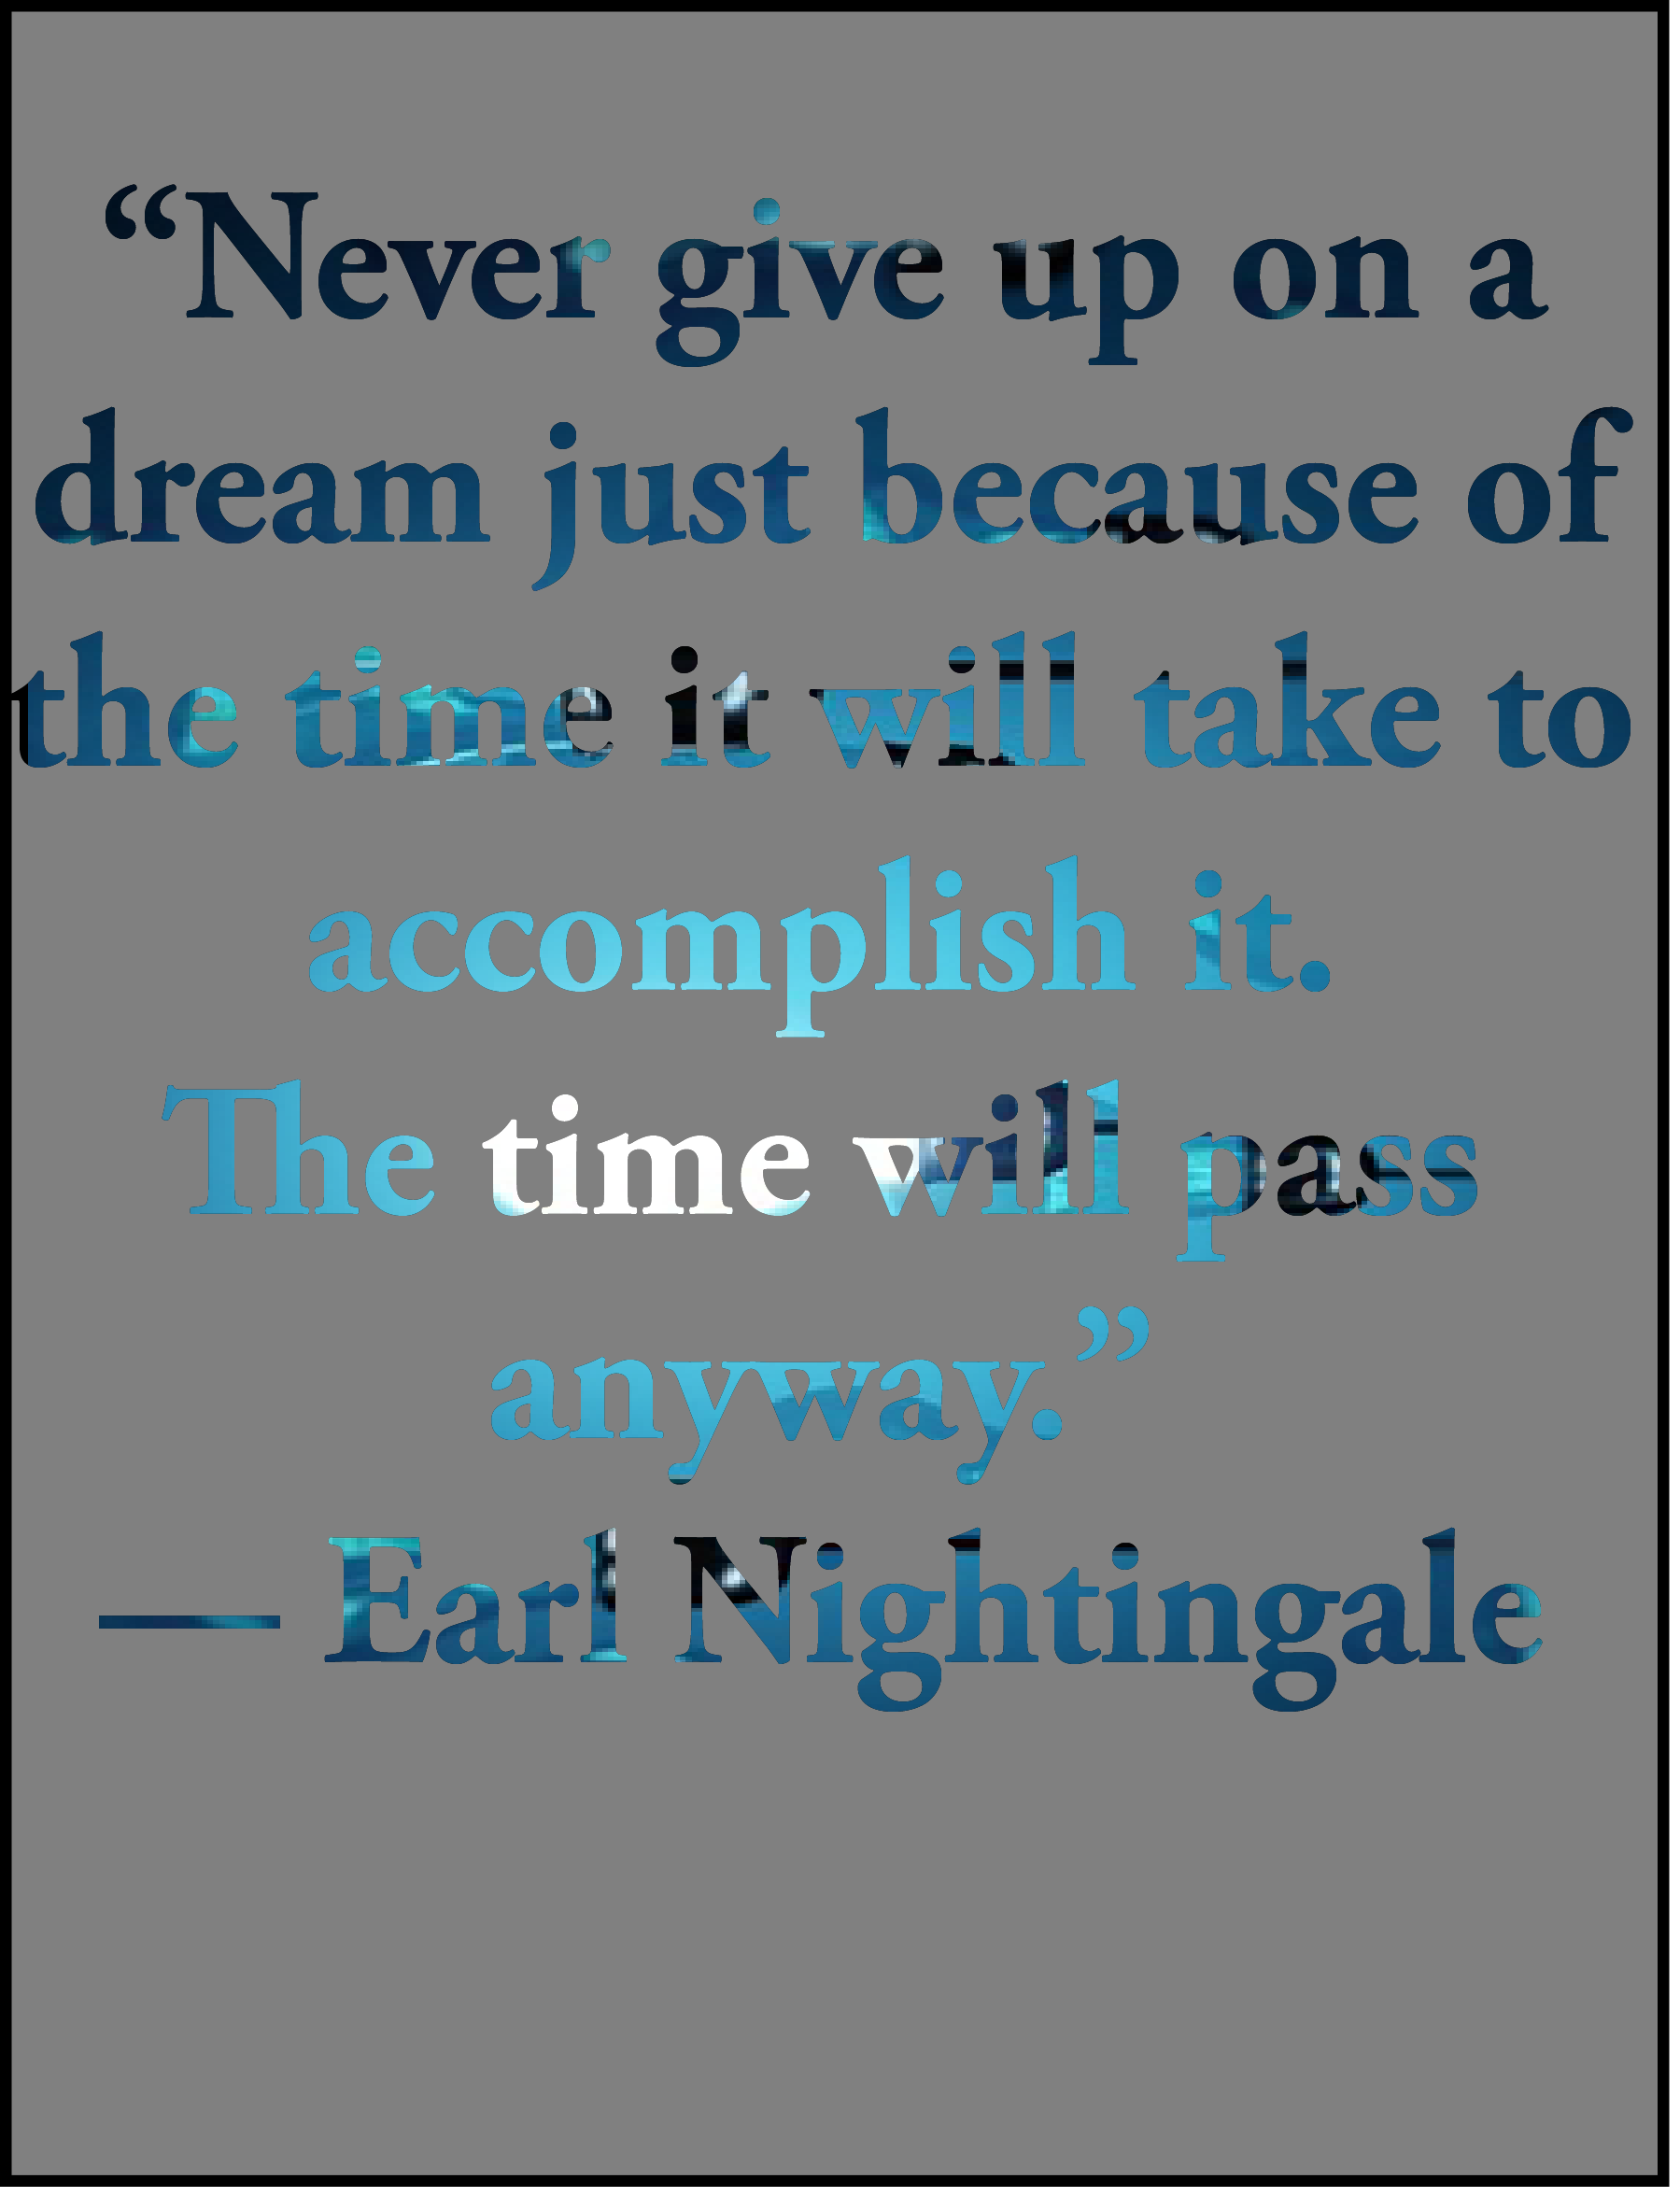 “Never give up on a dream just because of the time it will take to accomplish it. The time will pass anyway.” — Earl Nightingale inspirational quote